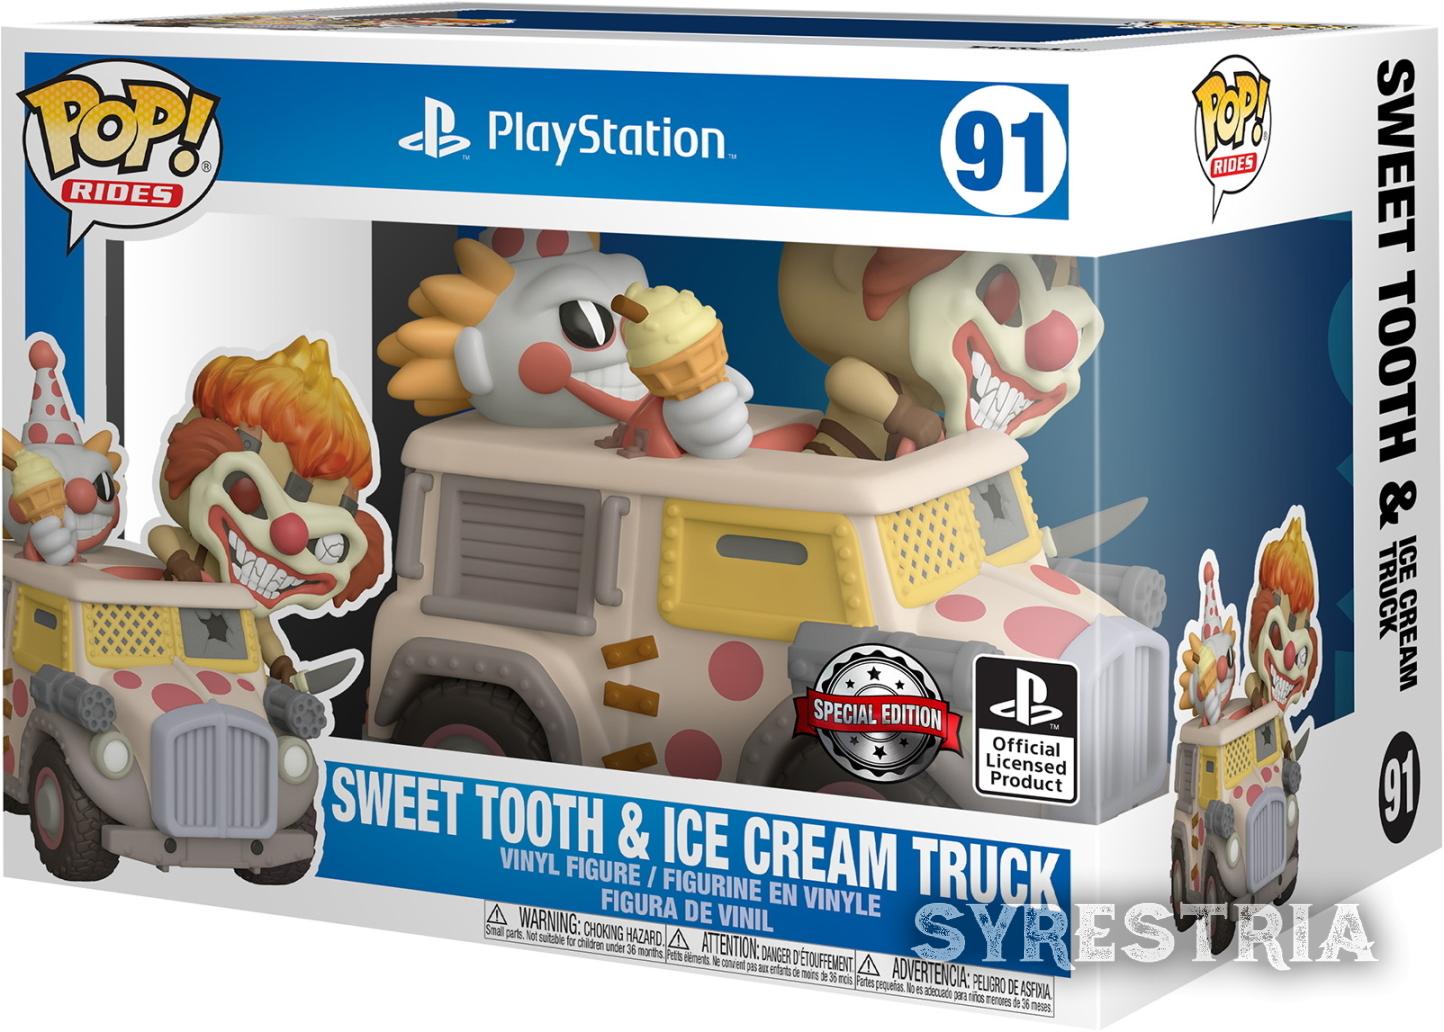 PlayStation - Sweet Tooth & Ice Cream Truck 91 Special Edition - Funko Pop! Rides - Vinyl Figur